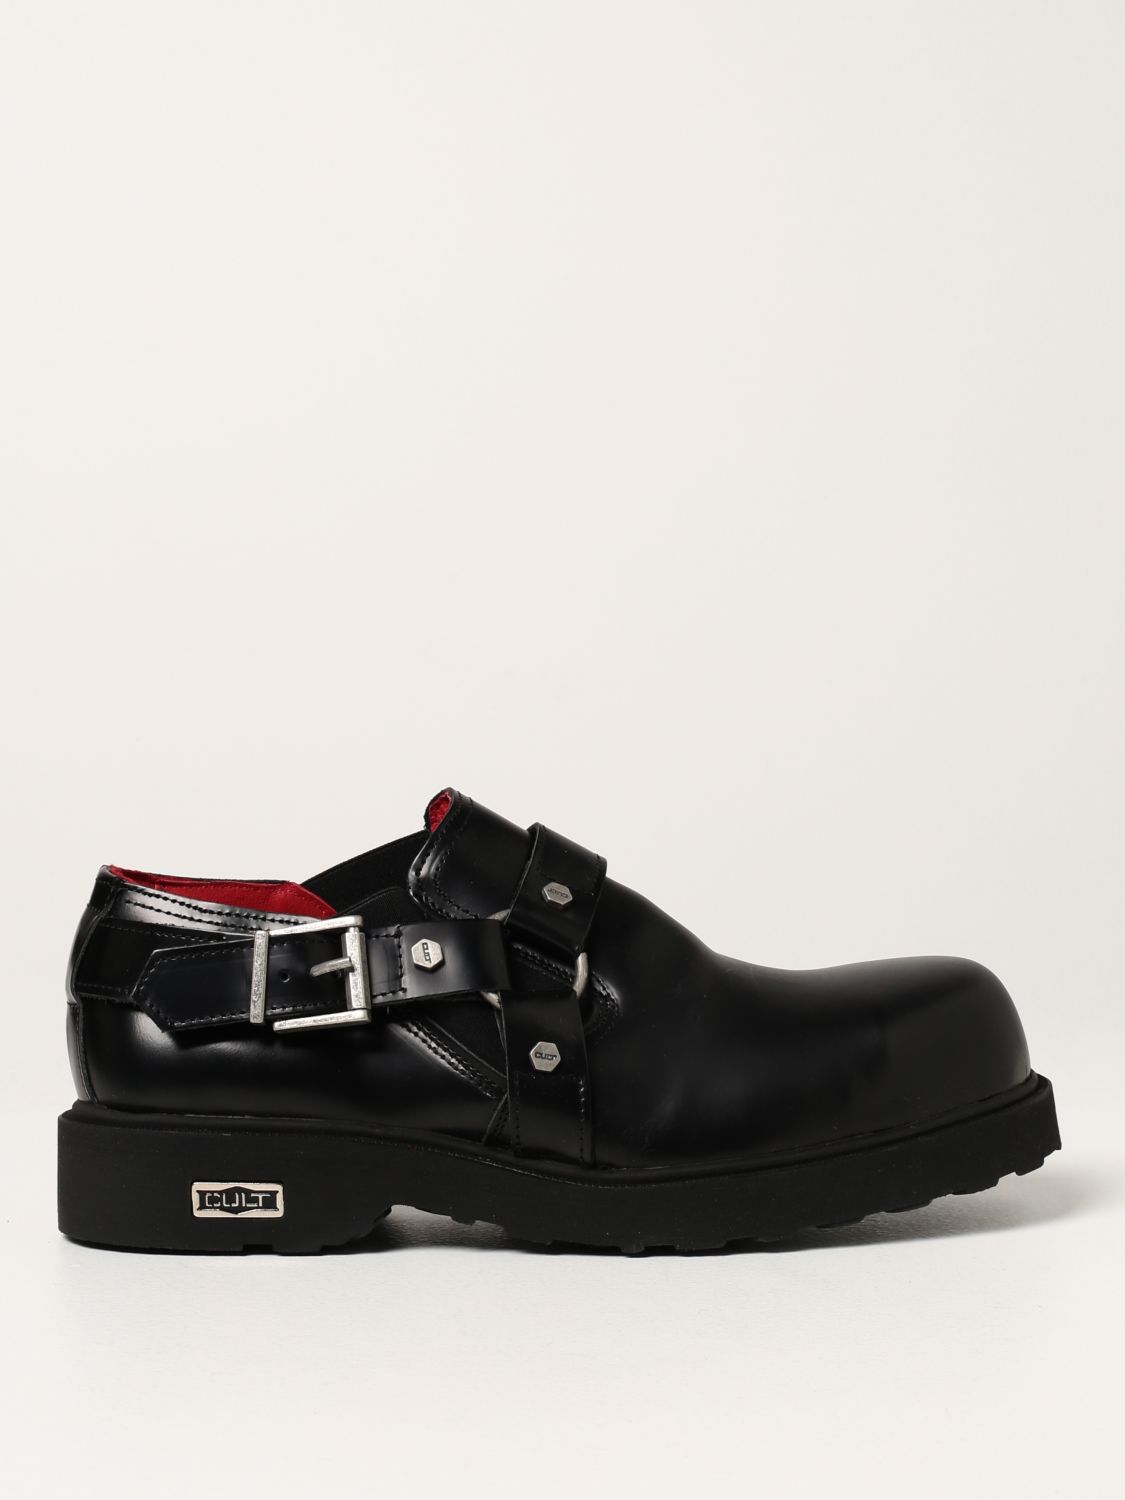 CULT BOLT: leather shoes - Black | Cult shoes 21ICAS online GIGLIO.COM